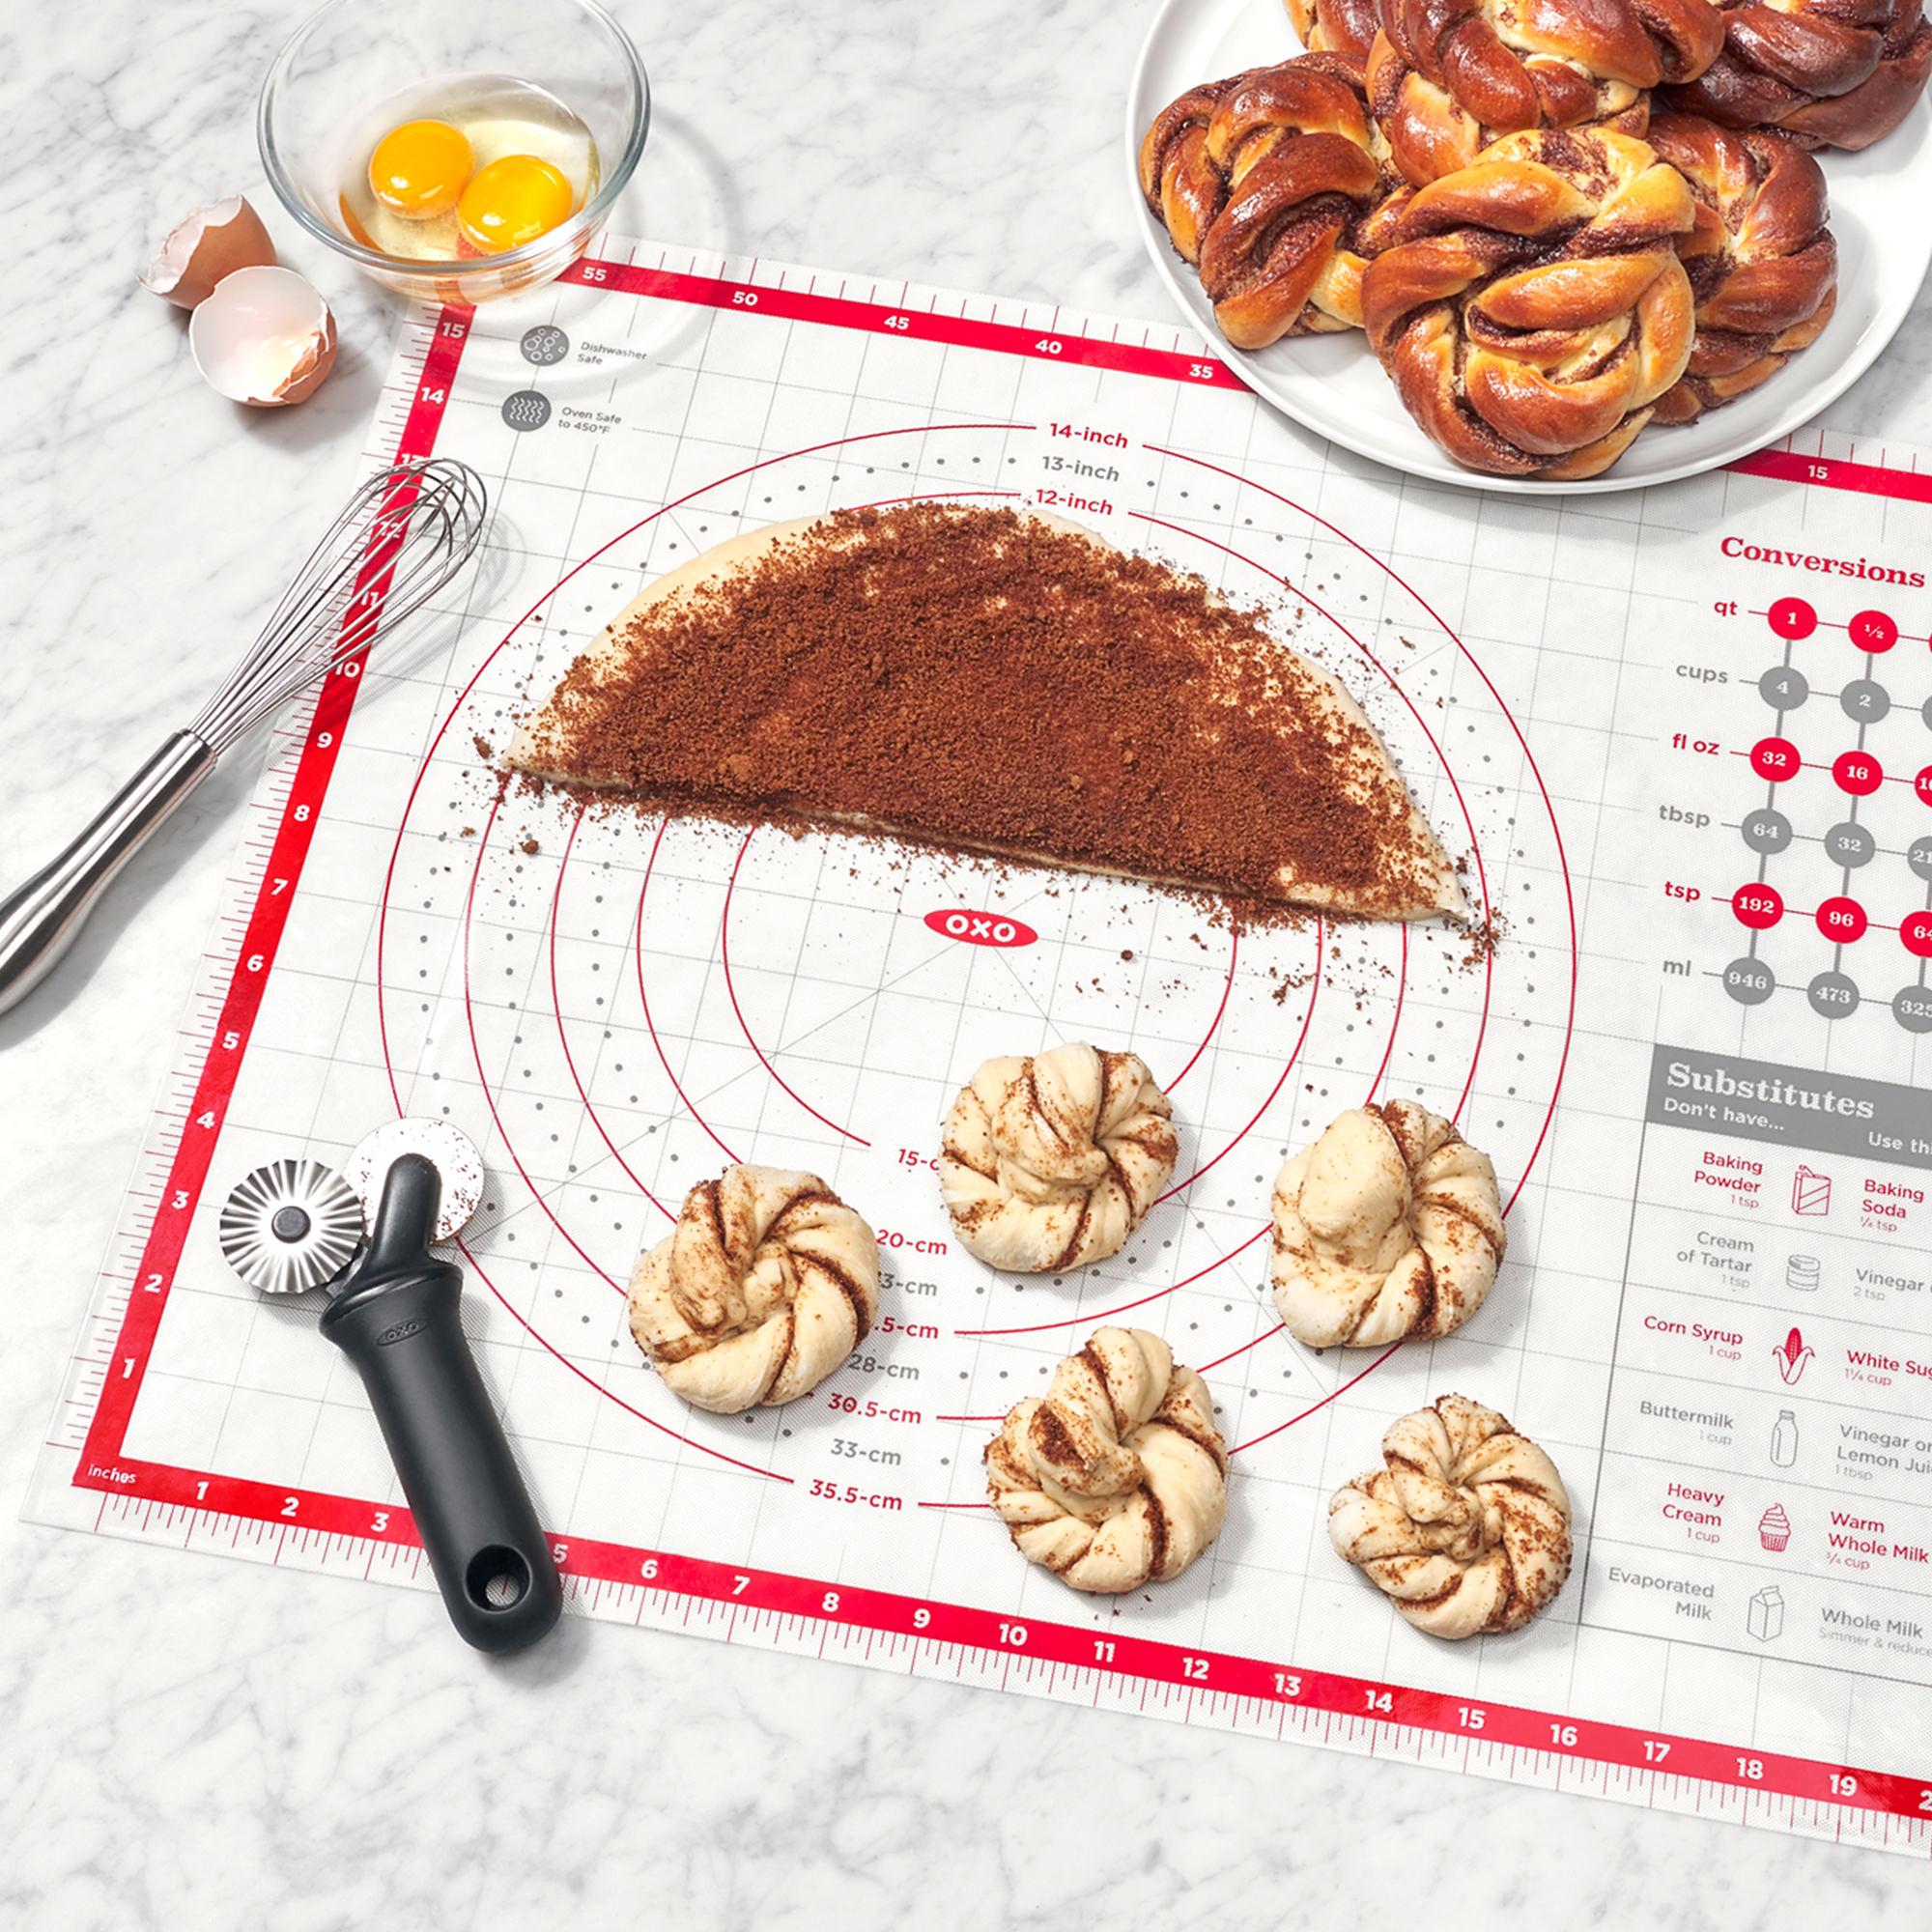 OXO Good Grips Silicone Pastry Mat 59x40cm Image 4